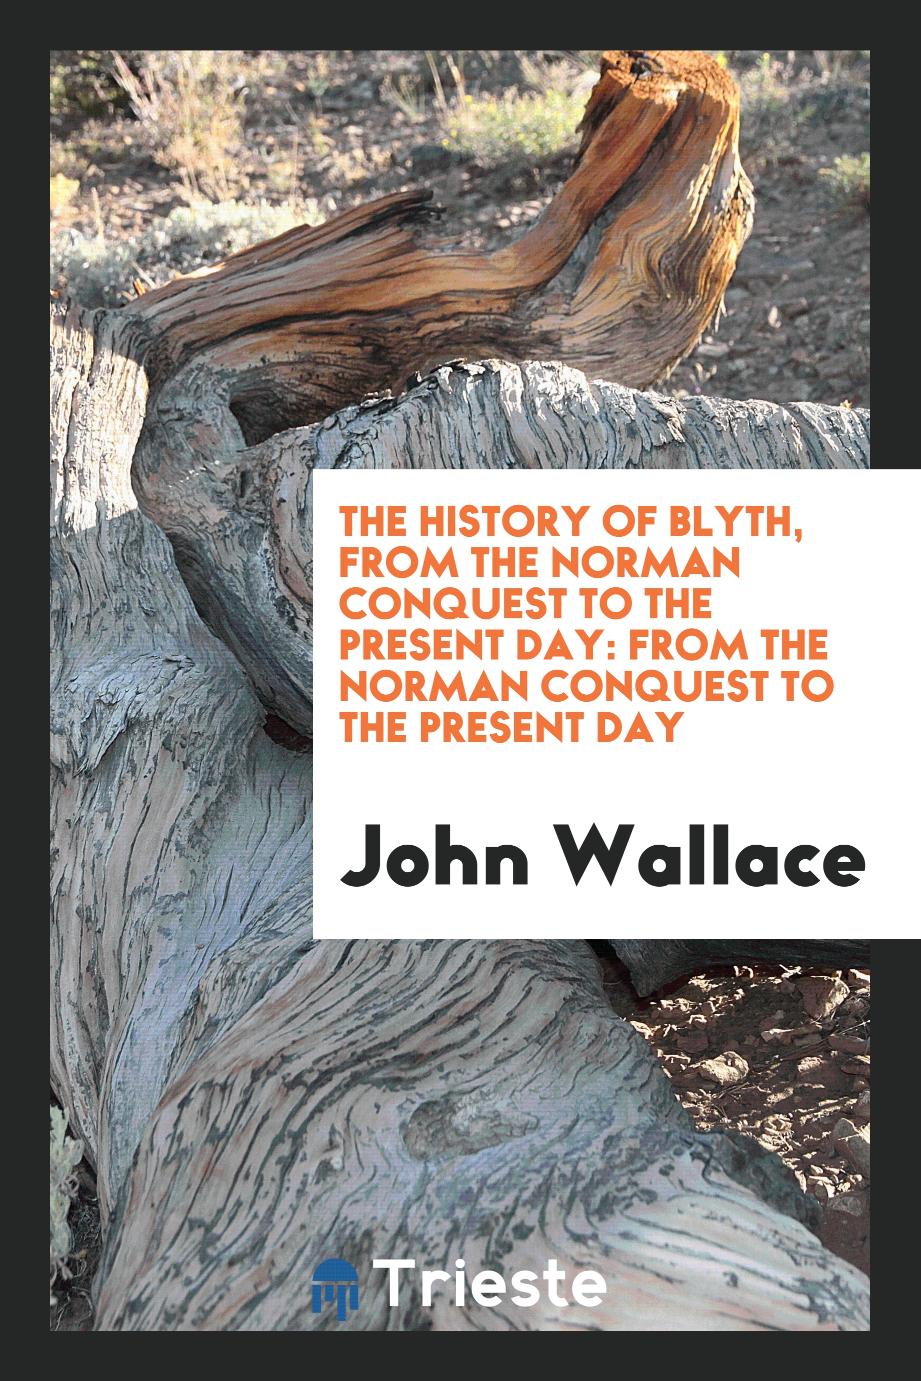 The History of Blyth, from the Norman Conquest to the Present Day: From the Norman Conquest to the Present Day